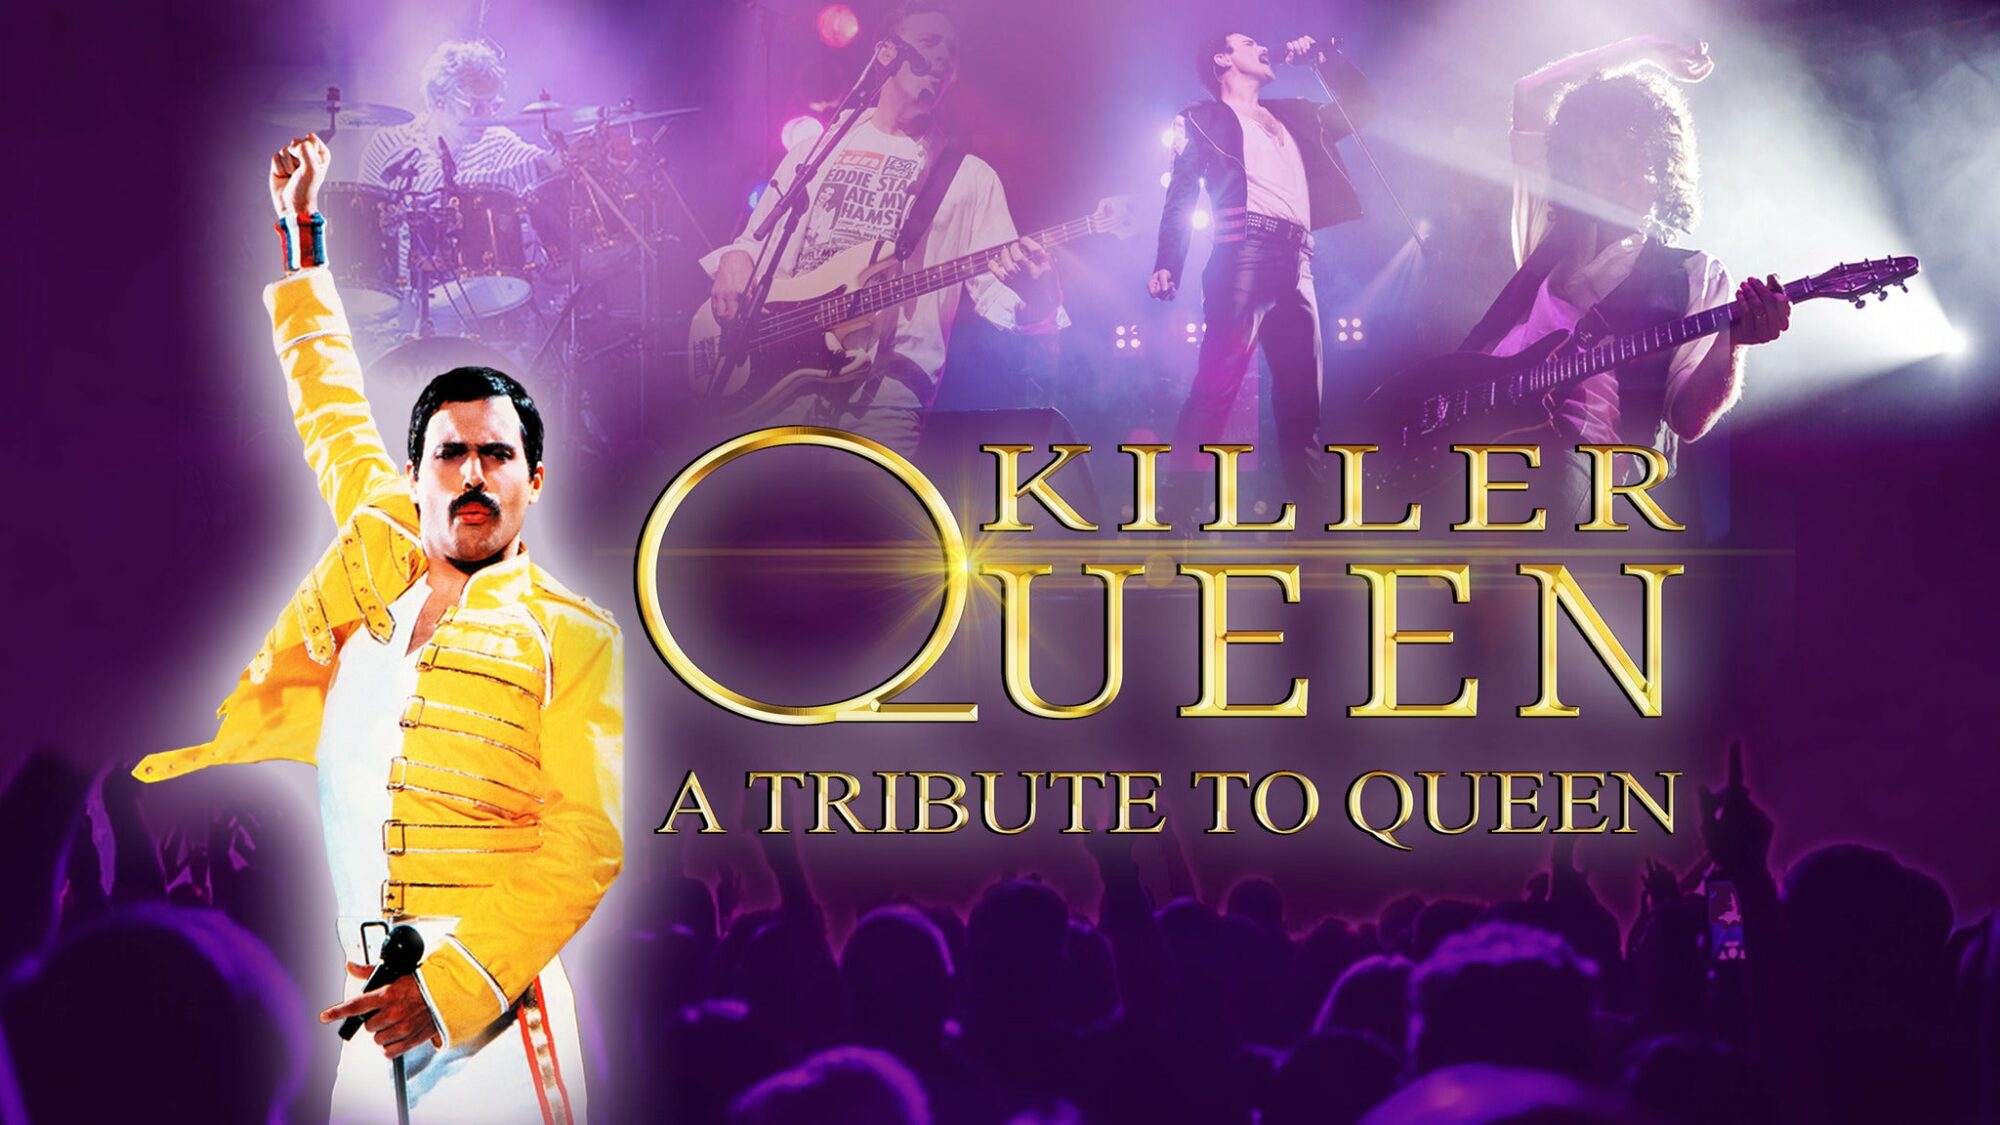 Image name Killer Queen at Sheffield City Hall Oval Hall Sheffield the 8 image from the post Killer Queen at Scarborough Spa Grand Hall, Scarborough in Yorkshire.com.